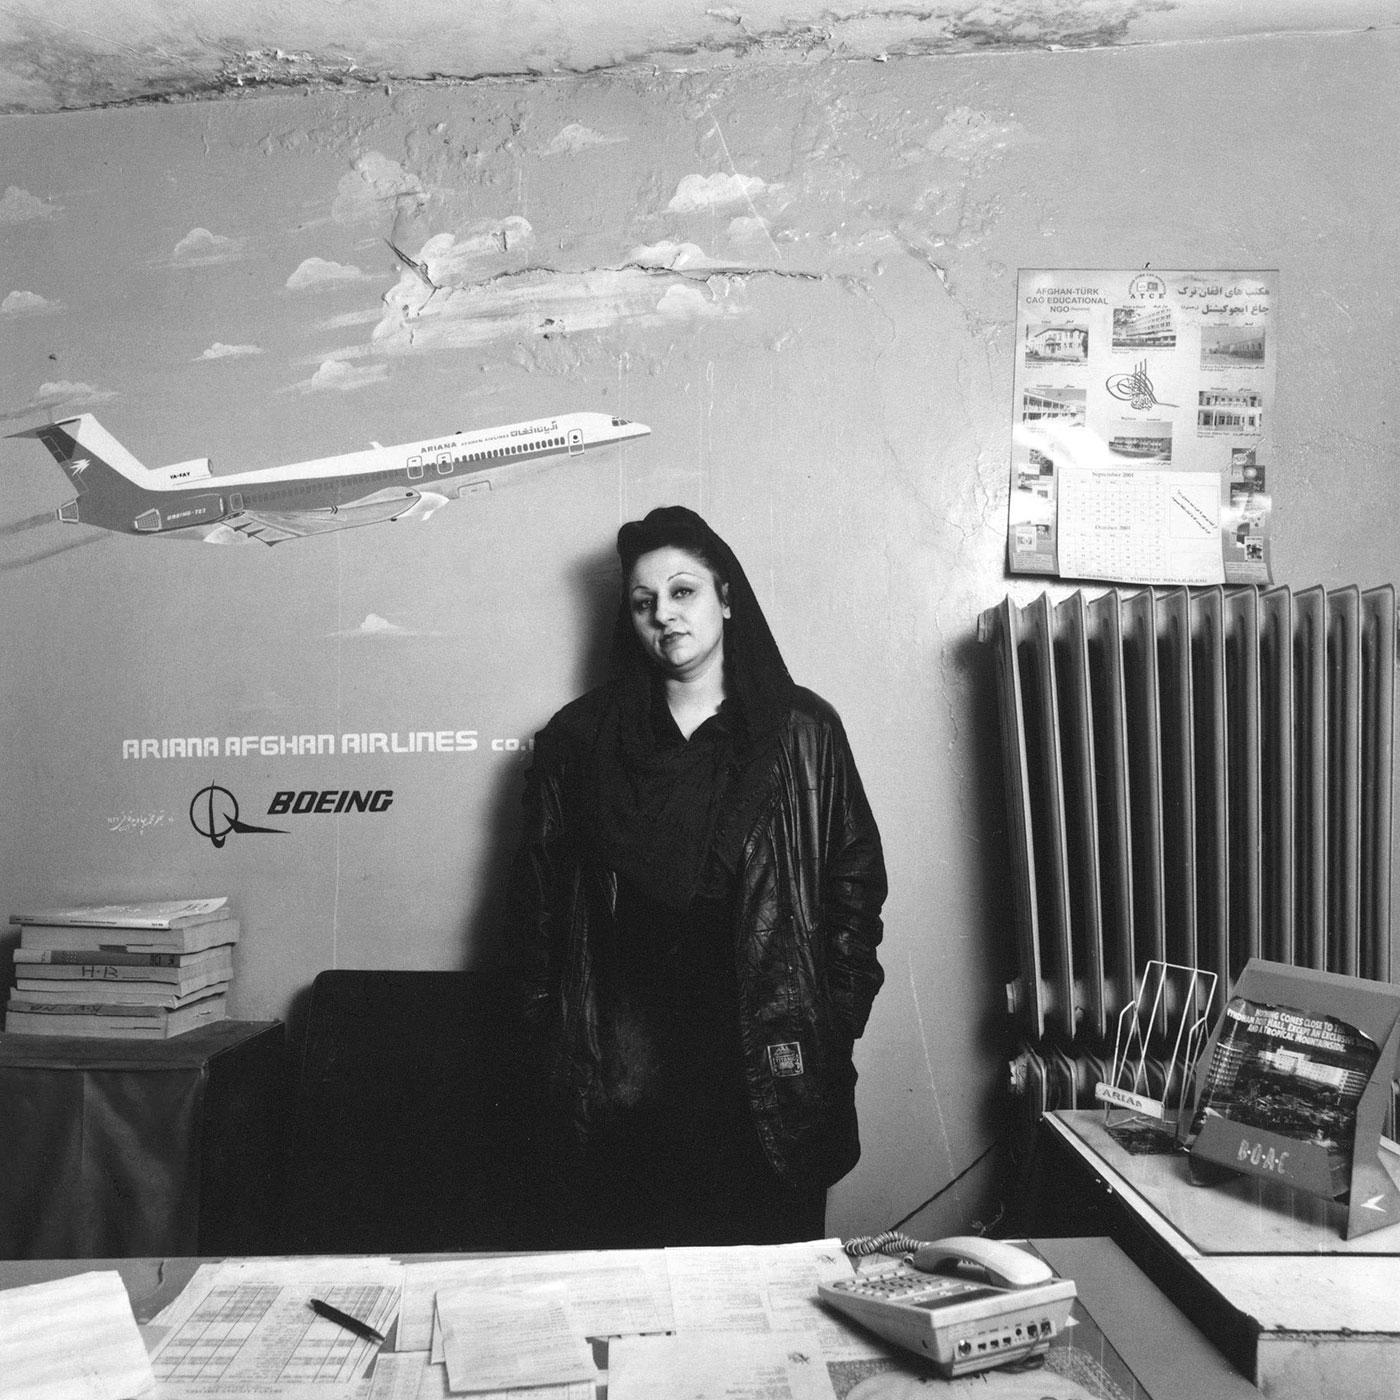 Black and white photograph of a woman wearing a head covering and leather jacket over dark clothing. She is behind a desk covered in paperwork and in front of a wall painted with artwork of an airplane in the sky.